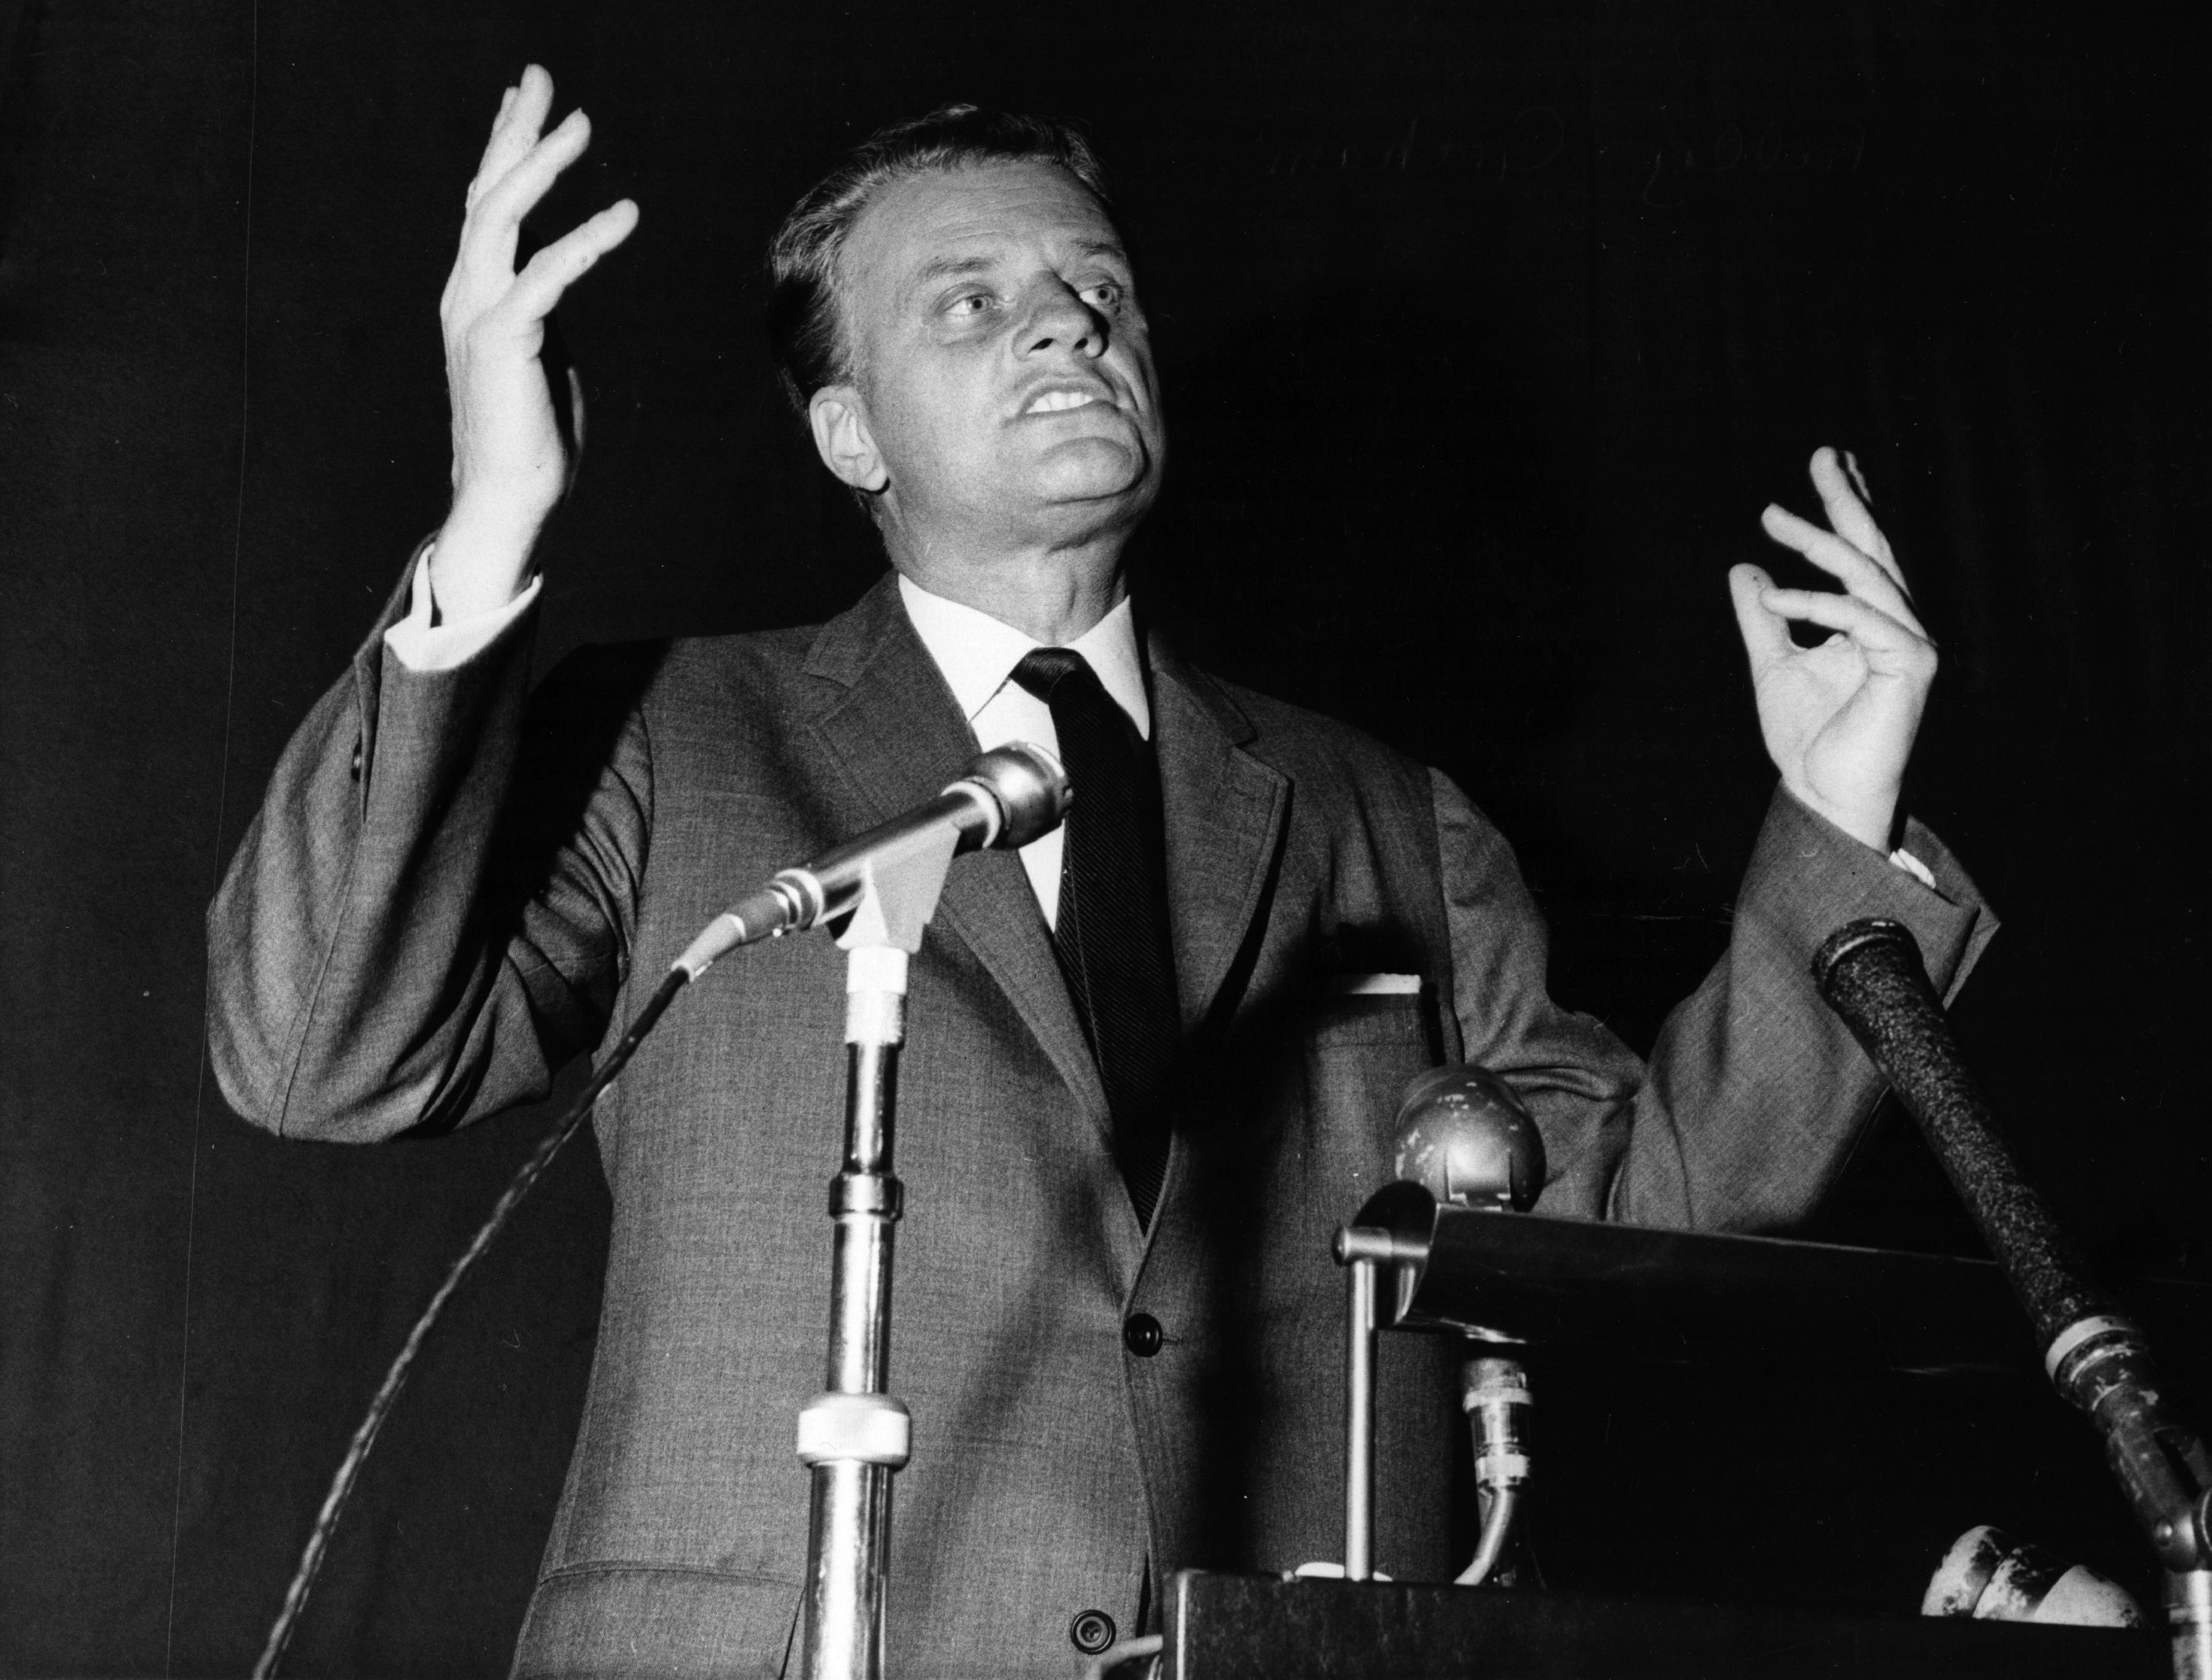 Billy Graham Preaching Getty Images